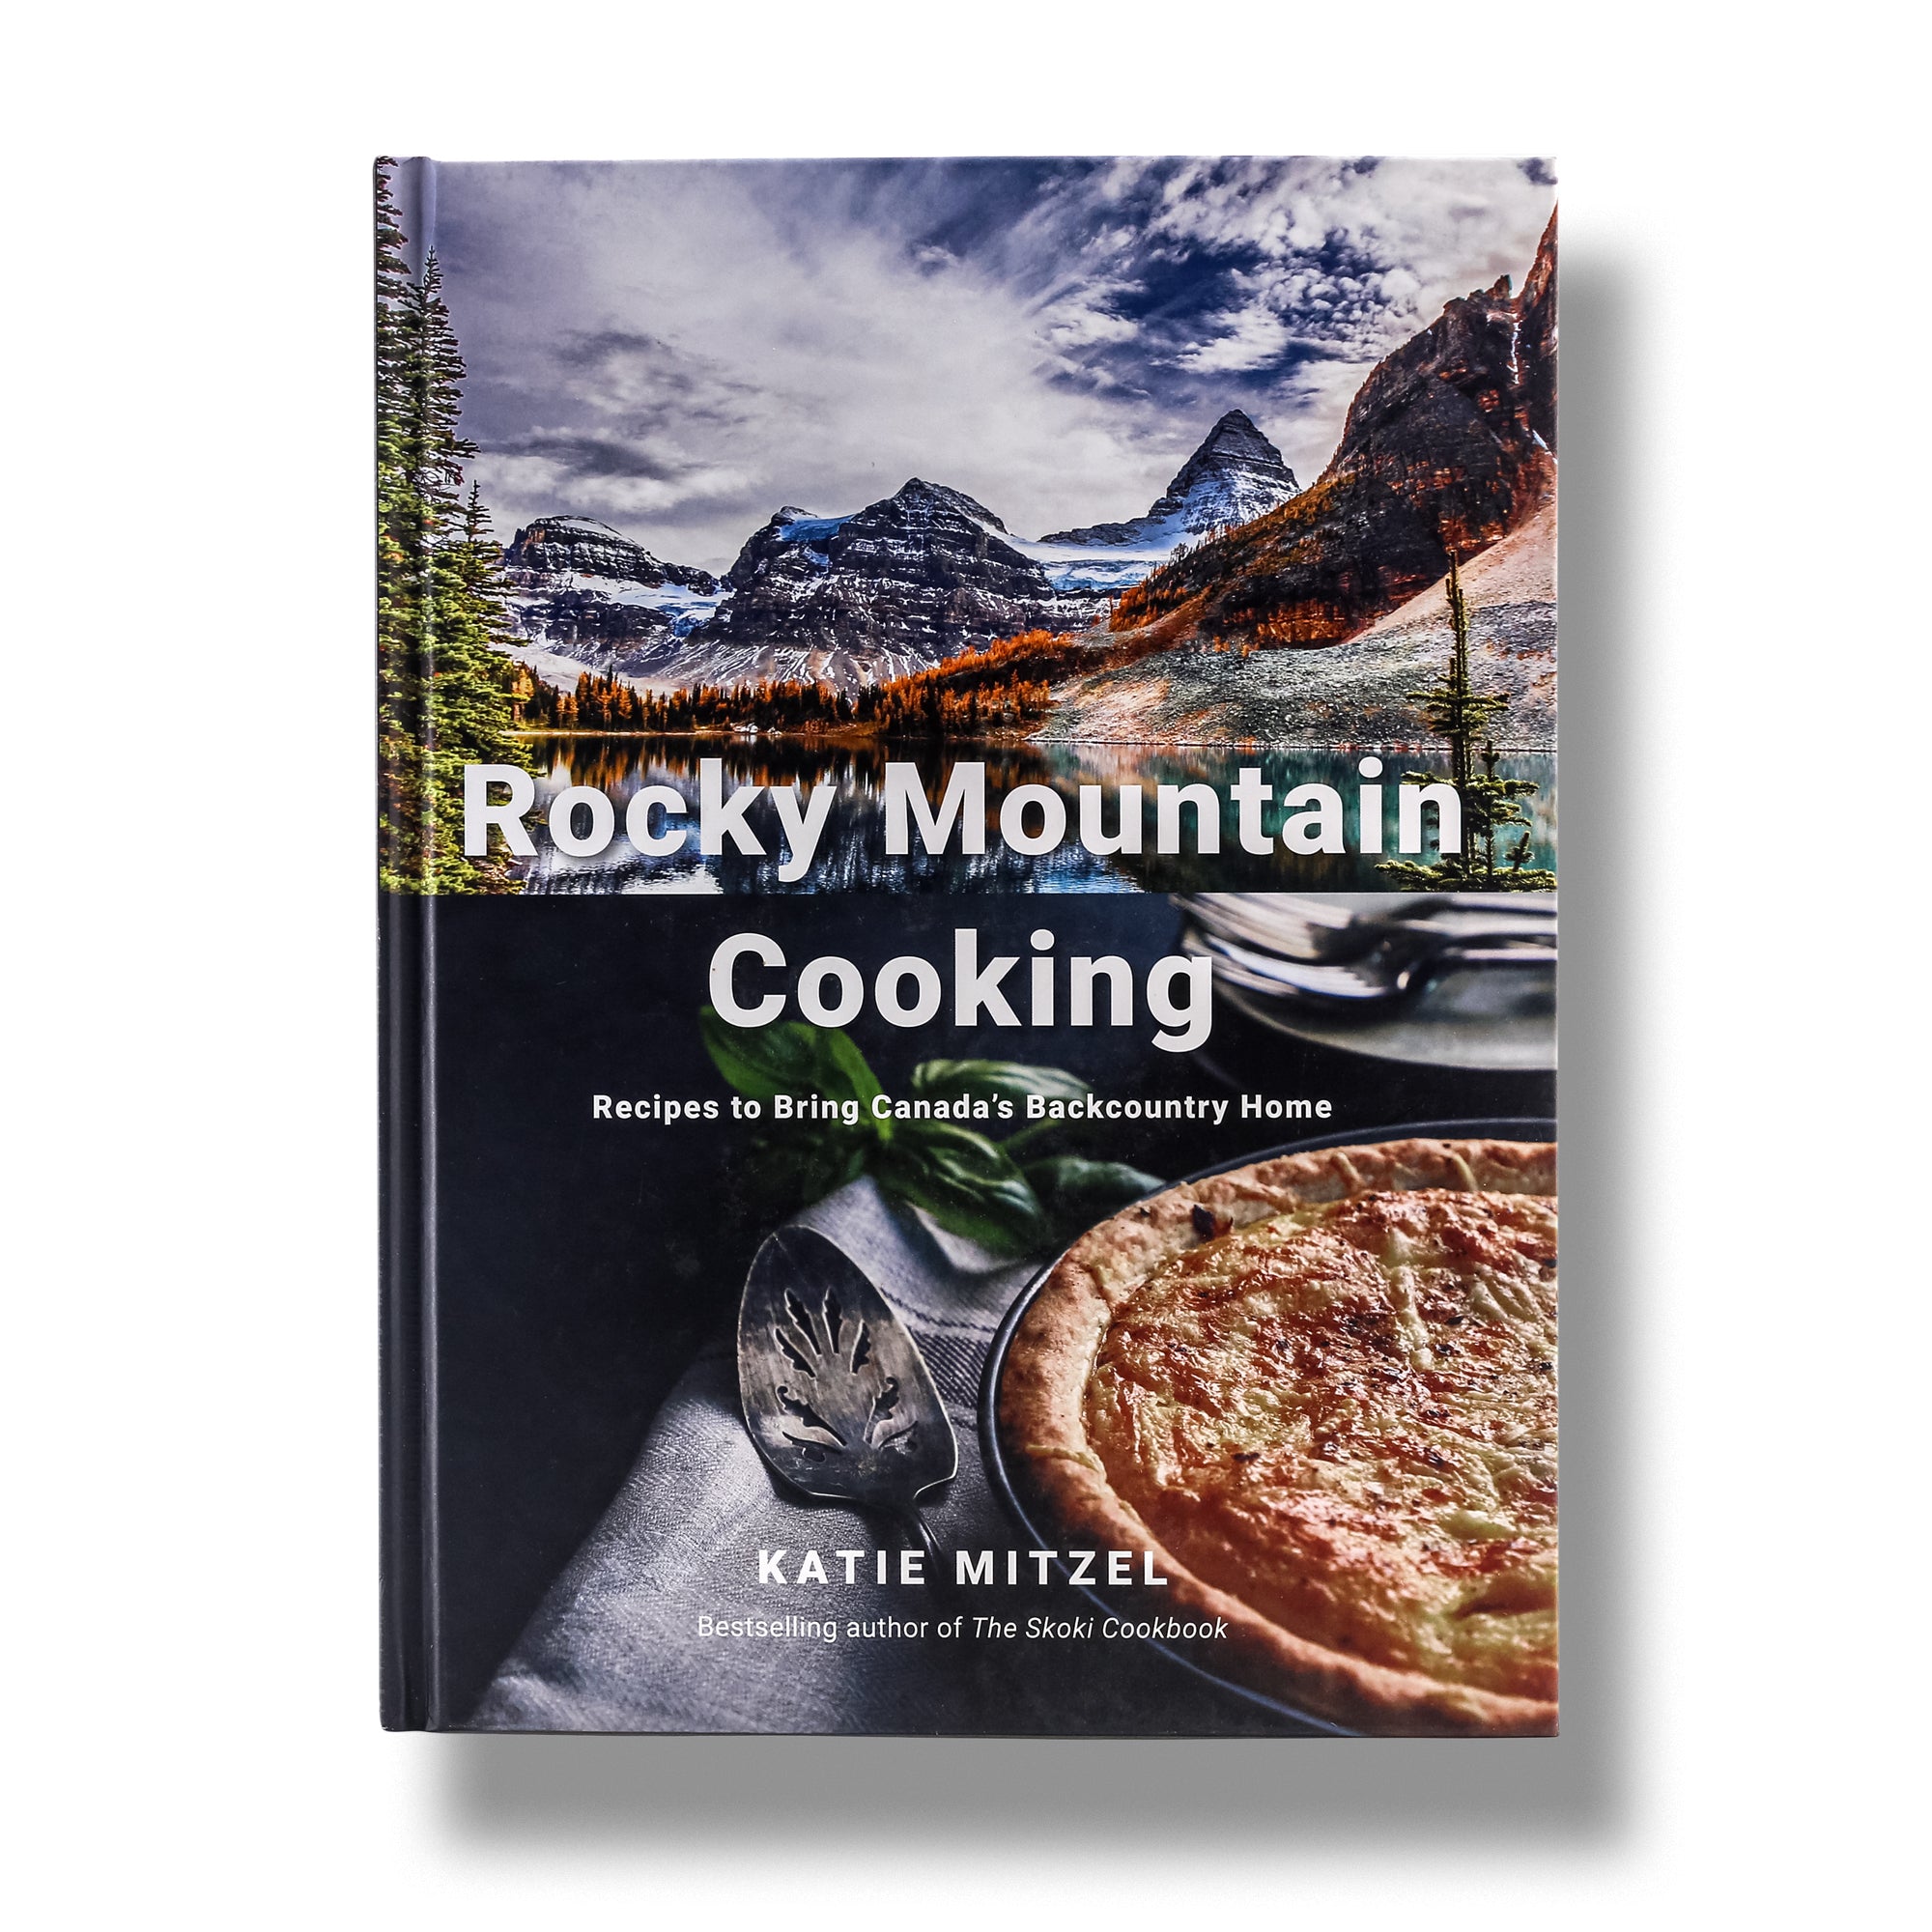 Rocky Mountain Cooking